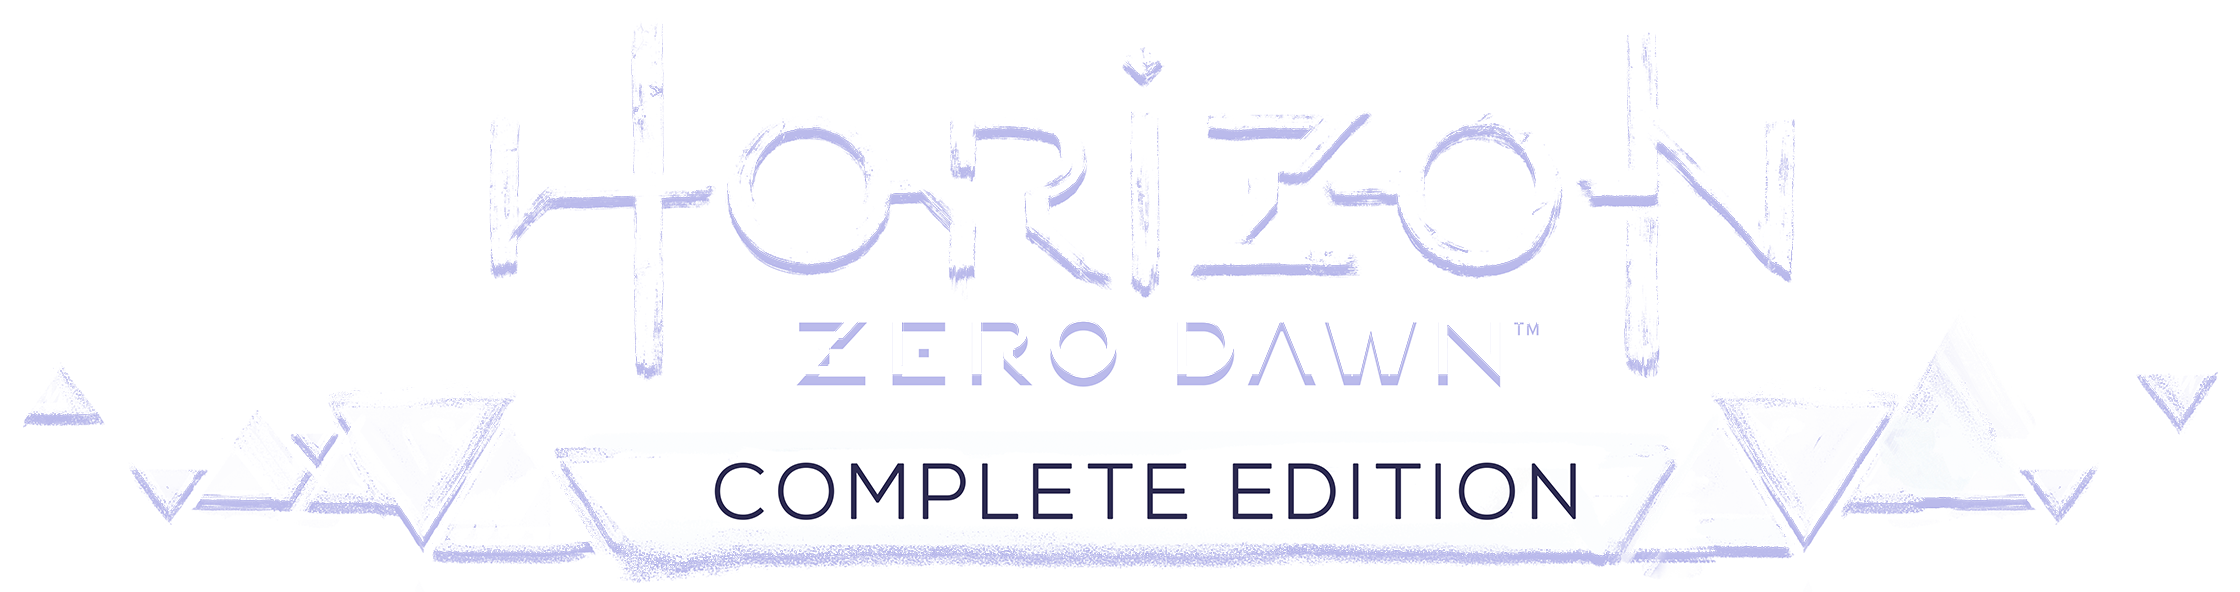 Buy Horizon Zero Dawn Complete Edition from the Humble Store and save 75%